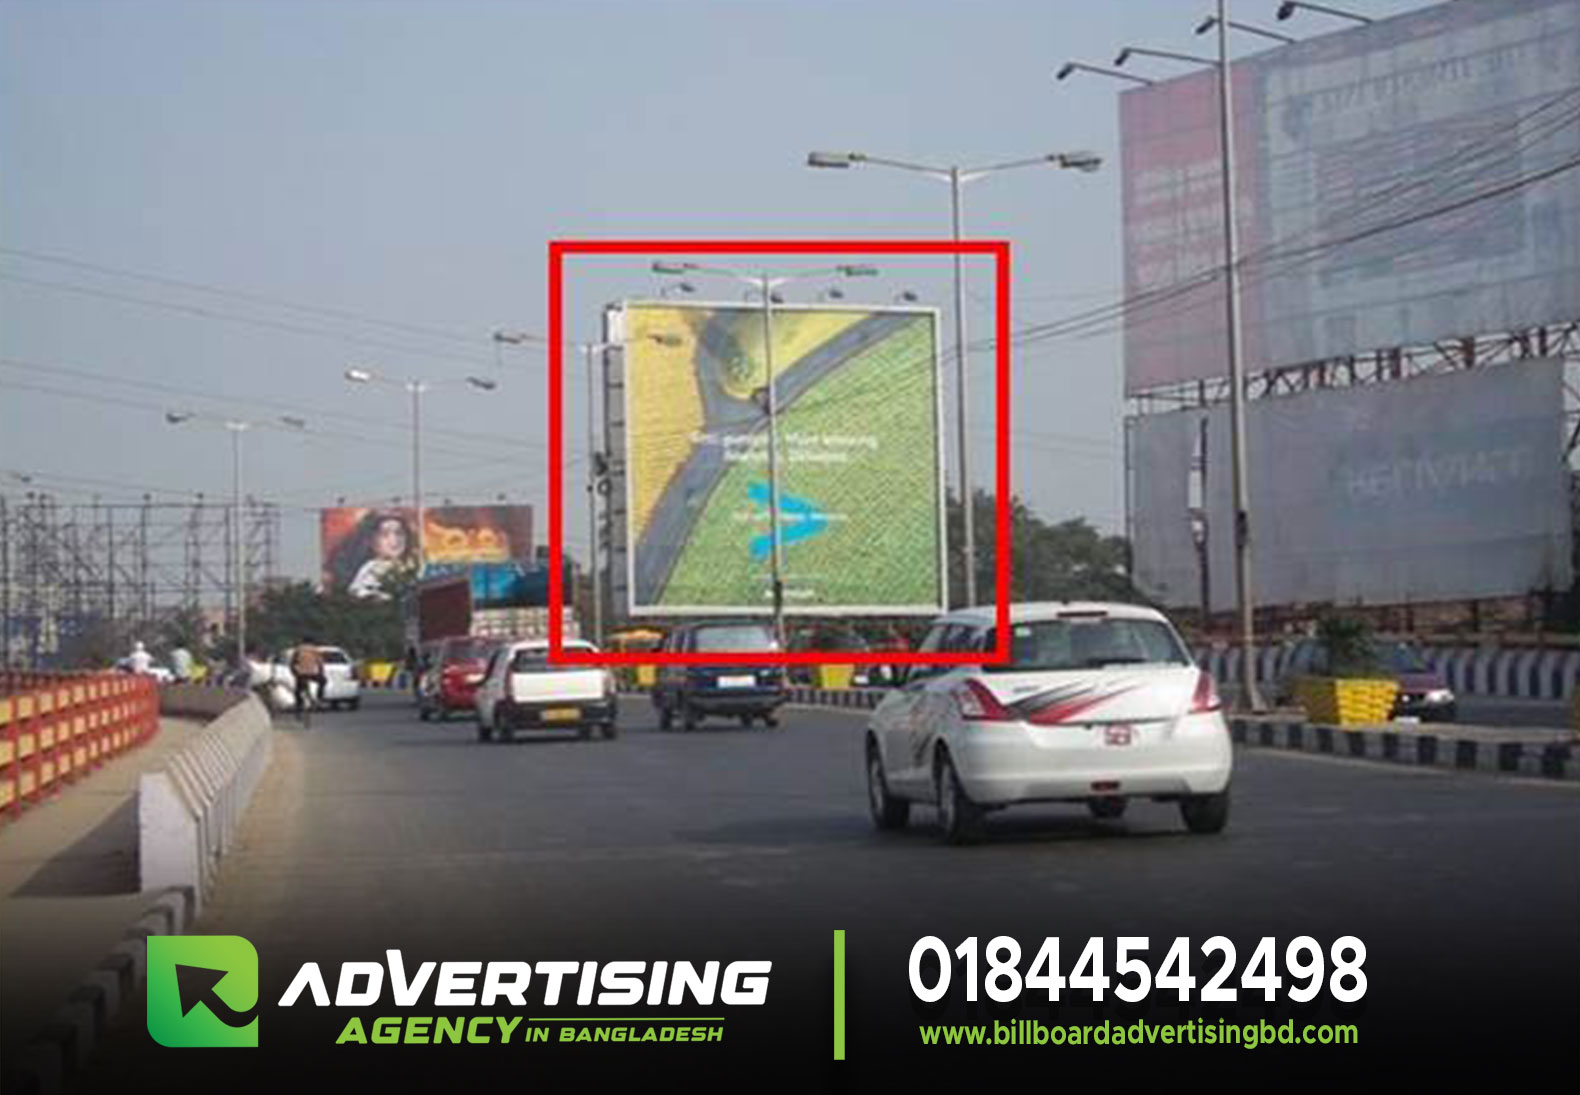 How to make a billboard. Create a billboard. Billboard making. How to make 3d billboard. How to make a 3d billboard. Cost of building a billboard. How to create a billboard. Make your own billboard. How to create 3d billboard. Makesweet billboard. Create your own billboard. How to make billboard advertising. How to make 3d led billboard. Create a billboard online. How to create a billboard advertisement. How to make a billboard advertisement. Digital billboard cost to build. Make billboard online. How to make a billboard sign. How to make a digital billboard. Cost to build a digital billboard. How to build a billboard sign. Create billboard mockup. How to make digital billboard. Make money with billboards. How to make a human billboard. Build your own billboard. How to make a billboard mockup. How to make a good billboard. How to make your own billboard. How to make a billboard design. How to make money with billboards. How to create a billboard design. Make a billboard sign. Make a billboard online. How to make money with online billboard ads. Make my own billboard. Create billboard design. How to create a digital billboard. Create a billboard ad. Cost of making a billboard. How do you make a billboard. How to create online billboard ads. How to make it to billboard. How to build a billboard frame. Create your own billboard online. How to make online billboards. Cost to make a billboard. Create a billboard design. How to make a mini billboard. Advertising on billboards. Outdoor advertisers. Billboards lamar. Cost to advertise on a billboard. Advertising on trucks. Outfront billboards. Billboard company. Lamar advertising company. Digital billboard advertising. Clear channel billboard. Digital billboard advertising companies. Digital billboard costs. Lamar outdoor advertising. Outdoor advertising agency. Outdoor advertising companies. Outdoor media advertising. Digital billboards for sale. Bill board maker. Best billboard ads. Digital billboard ads. Creative billboard advertising. Billboard company near me. Mobile digital billboard. Outdoor digital billboard. Price to advertise on a billboard. Billboard advertising companies. Clear channel billboard cost. Digital billboard advertising cost. Digital ooh advertising. Best billboard designs. Digital billboard pricing. Outdoor media company. Outfront billboards cost. Jcdecaux billboards. Digital billboard near me. Average cost to advertise on a billboard. Digital billboard truck. Billboard manufacturers. Hoarding advertising agency. Outdoor billboard companies. Digital billboard business. Creative ooh advertising. Digital billboard design. Lamar advertising billboards. Advertisement on truck. Geico billboards. Top outdoor advertising companies. Ooh advertising companies. Lamar digital billboards. 3d billboard manufacturer. Billboard agency. Billboard sign company. Digital advertising truck. Company billboards. Out of home advertising companies. Jcdecaux billboard prices. Outfront media billboards. Billboard business for sale. Digital billboard companies. Best outdoor ads. Buy digital billboard. Digital billboard signs. Digital advertising van. Coca cola billboard advertising. Digital billboard advertising rates. Billboard advertising agency. Billboard ad companies. Digital billboard manufacturers. Billboard sign companies near me. Best billboard advertising. T mobile billboard. Lamar signs billboards. Blip digital billboards. Digital out of home advertising companies. Lamar advertising corporate office. Best out of home advertising. 3d digital billboard price. Billboard construction companies. Digital billboard truck for sale. Ooh advertising agency. Best outdoor advertising. Mobile digital billboards for sale. Small digital billboard. Billboard installation companies. Best real estate billboards. 3d digital billboard manufacturer. Largest outdoor advertising companies. Indoor digital billboards. Outdoor digital billboards for sale. Creative outdoor ads. Company billboard design. Clear channel outdoor advertising. Outfront advertising billboards. Best ooh advertising. Clear channel billboard advertising. Billboard sign design. Lamar transit advertising. Bishopp outdoor advertising. Outdoor digital billboard cost. Yesco billboards. Digital billboard advertising near me. Out of home advertising agencies. Clear channel digital billboard. Outdoor advertising companies list. Billboard company for sale. Coca cola times square billboard. Coca cola billboard times square. Billboards joffrey ballet. Clever real estate billboards. Digital billboard rental. Largest billboard companies. Billboard maker near me. Clear channel billboards pricing. Outfront digital billboards. Unique outdoor advertising. Digital billboard marketing. Cbs outdoor advertising. Top billboard companies. Digital marketing billboards. Billboard printing companies. Bishopp billboards. Lamar billboard company. Led billboard manufacturers. Joffrey ballet prince. Best digital billboards. Digital billboard installation. Billboard contractors. Mobile digital led billboard advertising truck. Home depot billboard. Billboard agency international. Digital billboards for sale near me. 3d billboard company. Amazon billboard advertising. Digital advertising truck for sale. Digital advertising boards for sale. Chick fil a billboard ads. Digital mobile billboard truck. Owning a billboard business. Clear channel outdoor billboards. Local billboard companies. Mobile digital billboard truck. Viacom billboards. Cbs outdoor billboards. Mobile billboard companies. Best billboard designs 2022. Cadbury billboard advertisement. Construction company billboard. Billboard advertising companies near me. Digital billboard cost to build. Biggest billboard companies. Billboard structure manufacturers. Mediaworks billboards. Billboard sign maker. Big outdoor advertising. Nielsen billboard. Largest billboard advertising companies. Drew katz interstate outdoor advertising. Digital outdoor media. Largest digital billboard in the world. Outdoor advertising agency near me. Clear channel advertising cost. Lamar advertising near me. Led digital billboard truck for sale. Outdoor advertising companies near me. Lamar billboard rental. Outfront prime billboard. Cost to build a digital billboard. Digital mobile billboard truck for sale. The best billboard ads. Mini digital billboard. Coca cola outdoor advertising. Advertising hoarding companies. Digital led advertising hoarding. Creative real estate billboards. Best marketing billboards. Dhl billboard. Billboard media companies. Billboard jcdecaux. Digital billboard rates. Fedex billboard. Best billboard ads 2021. Apn billboards. Lamar advertising prices. Billboard installation companies near me. National billboard companies. Digital advertising vans. Ooh media billboards. Ocean outdoor advertising. Allvision billboards. Primesight billboards. Billboard digital marketing. Titan outdoor advertising. Top billboard advertising companies. Primedia billboards. Lamar advertising competitors. Gannett outdoor advertising. Google outdoor advertising. Top ooh advertisers. Billboard ad maker. Outfront billboard company. Digivision billboards. Truck advertising companies. Average cost of digital billboard advertising. Top out of home advertising companies. Advertise on digital billboards. The mobile billboard company. Pattison outdoor advertising rates. Jim pattison billboards. Lamar digital billboards cost. Lamar advertising address. Clear channel times square. 3d digital billboard cost. Pattison digital billboard. Digital mobile advertising truck. Largest out of home advertising companies. Led digital billboard truck. Biggest outdoor advertising companies. Best billboard signs. Billboard building company. Advertising on trucks and trailers. Billboard advertising ltd. Best billboards in the world. Outfront outdoor advertising. Billboard sign manufacturers. Google outdoor ads. National billboard advertising. Facial recognition advertising billboards. Mobile digital billboard cost. Cbs outdoor outfront media. Interstate jcdecaux billboard. Lamar advertising owner. Billboard maintenance companies. Cost to build digital billboard. Public billboard companies. Lamar billboards stock. Billboard promotion agency. Outdoor media advertising companies. Adams outdoor advertising limited partnership. Electronic billboard companies. Prime media billboards. Trivision billboard manufacturers. Digital billboard signs for sale. Outdoor billboard advertising companies. Cbs outdoor americas inc. Billboard marketing companies. Ddi billboards. International outdoor advertising. Lamar outdoor signs. Lamar outdoor billboards. Outdoor led billboard manufacturers. Advertising agency. Market agency. Marketing services agencies. Creative agency. Brand agencies. Advertising company. Ad agency. Facebook ads agency. Creatives in advertising. Google ads agency. Media agencies. Advertising agency near me. Advertising services. Online advertising companies. Ogilvy on advertising. Ad company. Google ads company. Ppc advertising companies. Tiktok ad agency. Ppc in digital marketing. Social media advertising company. Digital advertising companies. Facebook advertising services. Programmatic agency. Media advertising agency. Facebook advertising company. Amazon ppc management. Google ppc management. Advertising industries. Tv agency. Ppc advertising firm. Top advertising agencies. Media buying agency. Ad agency near me. Advertising companies near me. Small business advertising agency. Digital advertising agencies. Facebook advertising agency. Best advertising agencies. Creative advertising agency. Advertising firm. Online advertising agency. Google ads marketing agency. Facebook ads for real estate agents. Top advertising agencies in the world. Amazon ppc agency. Paid media agency. Ppc advertising services. Social media advertising agencies. Digital media agencies. Programmatic advertising companies. Video advertising agency. Creative brand agency. Video advertising companies. Web advertising agency. Google advertising agency. Amazon advertising agency. Taxi agency. Creative ad agency. Creative agencies near me. Video ad agency. Top 100 advertising agencies. Wpp advertising. Top ad agencies. Facebook marketing company. Bbdo advertising. Ppc advertising management. Outdoor advertising agency. Healthcare advertising agencies. Digital ad agencies. Social media ad agency. Marketing and advertising agency. Marketing and advertising companies. Amazon ads agency. Digital marketing agency ads. Internet advertising company. Real estate agent ad. Biggest advertising agencies. Ppc marketing company. Digital branding agency. Google ads agency near me. Digital advertising services. Outdoor advertising companies. Big 4 advertising agencies. Publicity agency. Newspaper advertising agency near me. Ecommerce advertising agency. Ppc ad agency. Best advertising companies. Amazon advertising partner network. Digital creative agency. Full service advertising agency. Largest advertising agencies. Google ppc agency. Advertising agency services. Online ad agency. Ipg advertising. Programmatic advertising agency. Amazon advertising services. Best ad agencies. Top advertising companies. Linkedin ads agency. Best advertising agencies in the world. Dsp in digital marketing. Advertising agency website. Internet advertising agency. Boutique creative agency. Facebook marketing agency. Advertising marketing agency. Linkedin advertising agency. Unlimited advertising group. Automotive marketing agency. Highdive advertising. Newspaper advertising agency. Best google ads agency. Full service ads. Tv advertising agency. Facebook ads company. Google adwords in digital marketing. Omd advertising. Advertising recruitment agencies. Marketing agency ads. Dentsu advertising. Google ads management agency. Top media agencies. Marketing advertising agency. B2b advertising agency. Ad age a list. Billboard advertising companies. Top 10 advertising agencies in world. Google ads services agency. International advertising agency. Facebook ad agency pricing. List of advertising agencies. Digital advertising agency near me. Advertising group. Brand advertising agency. Local advertising companies. Marketing advertising companies. Facebook ad agency near me. Social advertising companies. Biggest ad agencies. Mudra advertising. Google adwords ppc management. Google ads management company. Leo burnett agency. Biggest advertising agencies in the world. Bing ads agency. Car advertising companies. Global advertising agency. Largest advertising agencies in the world. Social media creative agency. Paid advertising agency. Facebook ads marketing agency. Top ad agencies in the world. Top 10 advertising agencies. Local advertising agency. Advertising firms near me. Facebook ads for real estate agents 2022. Big advertising agencies. Havas advertising. Mobile advertising companies. Twitter advertising agency. Google advertising company. Ppc in amazon. Volney palmer. Best media agencies. Fcb foote cone & belding. Multimedia agency. Paid ads agency. Largest ad agencies. Anomaly ad agency. B2b ad agency. Outdoor marketing agency. Digital advertising firms. Ad agency website. Advertising agency company. Creative recruitment ads. Famous advertising agency. Omnicom advertising. Ad ag. Google ads in digital marketing. Twitter ads agency. Promotional marketing agency. Social advertising agency. Digital marketing and advertising agency. Top 5 advertising agencies in the world. Full service ad agency. National advertising agency. Bvk agency. B2b creative agency. Mudra ad agency. Ppc campaign management company. Mobile advertising agency. Radio advertising agency. Best ad agencies in the world. Top creative agencies in the world. Native advertising agency. Digital marketing advertising agency. Branding and advertising agency. Biggest ad agency in the world. Ppc ad management. Fallon advertising. Paid search advertising agency. Digital media buying agency. Digital advertising infusions company. Biggest advertising companies. Apple advertising agency. Publicis advertising. The ad agency. Top outdoor advertising companies. Ad agency services. Boutique advertising agency. Apple ad agency. Nike advertising agency. Advertising design company. Wpp ad agency. Best advertising agency websites. Nike ad agency. Biggest media agencies. Google ad company. Marketing and advertising firms. Yellow ad agency. Media and advertising companies. Paid advertising companies. Ooh agency. Advert company. Mccann advertising agency. Lintas advertising agency. Best facebook advertising agency. Jwt ad agency. Carat advertising. J walter thompson worldwide. Advertising agency services list. Online advertising firm. Leo burnett melbourne. Big 6 advertising agencies. Grey ad agency. Ackermans advertising agency. Medical advertising agency. Ppc advertising management services. Advertising agency internet marketing. Pressman advertising limited. Y&r advertising. Merkle advertising. Facebook advertising agency for small business. Best ad agency websites. Ad management companies. 3d brand agency. Fig advertising agency.